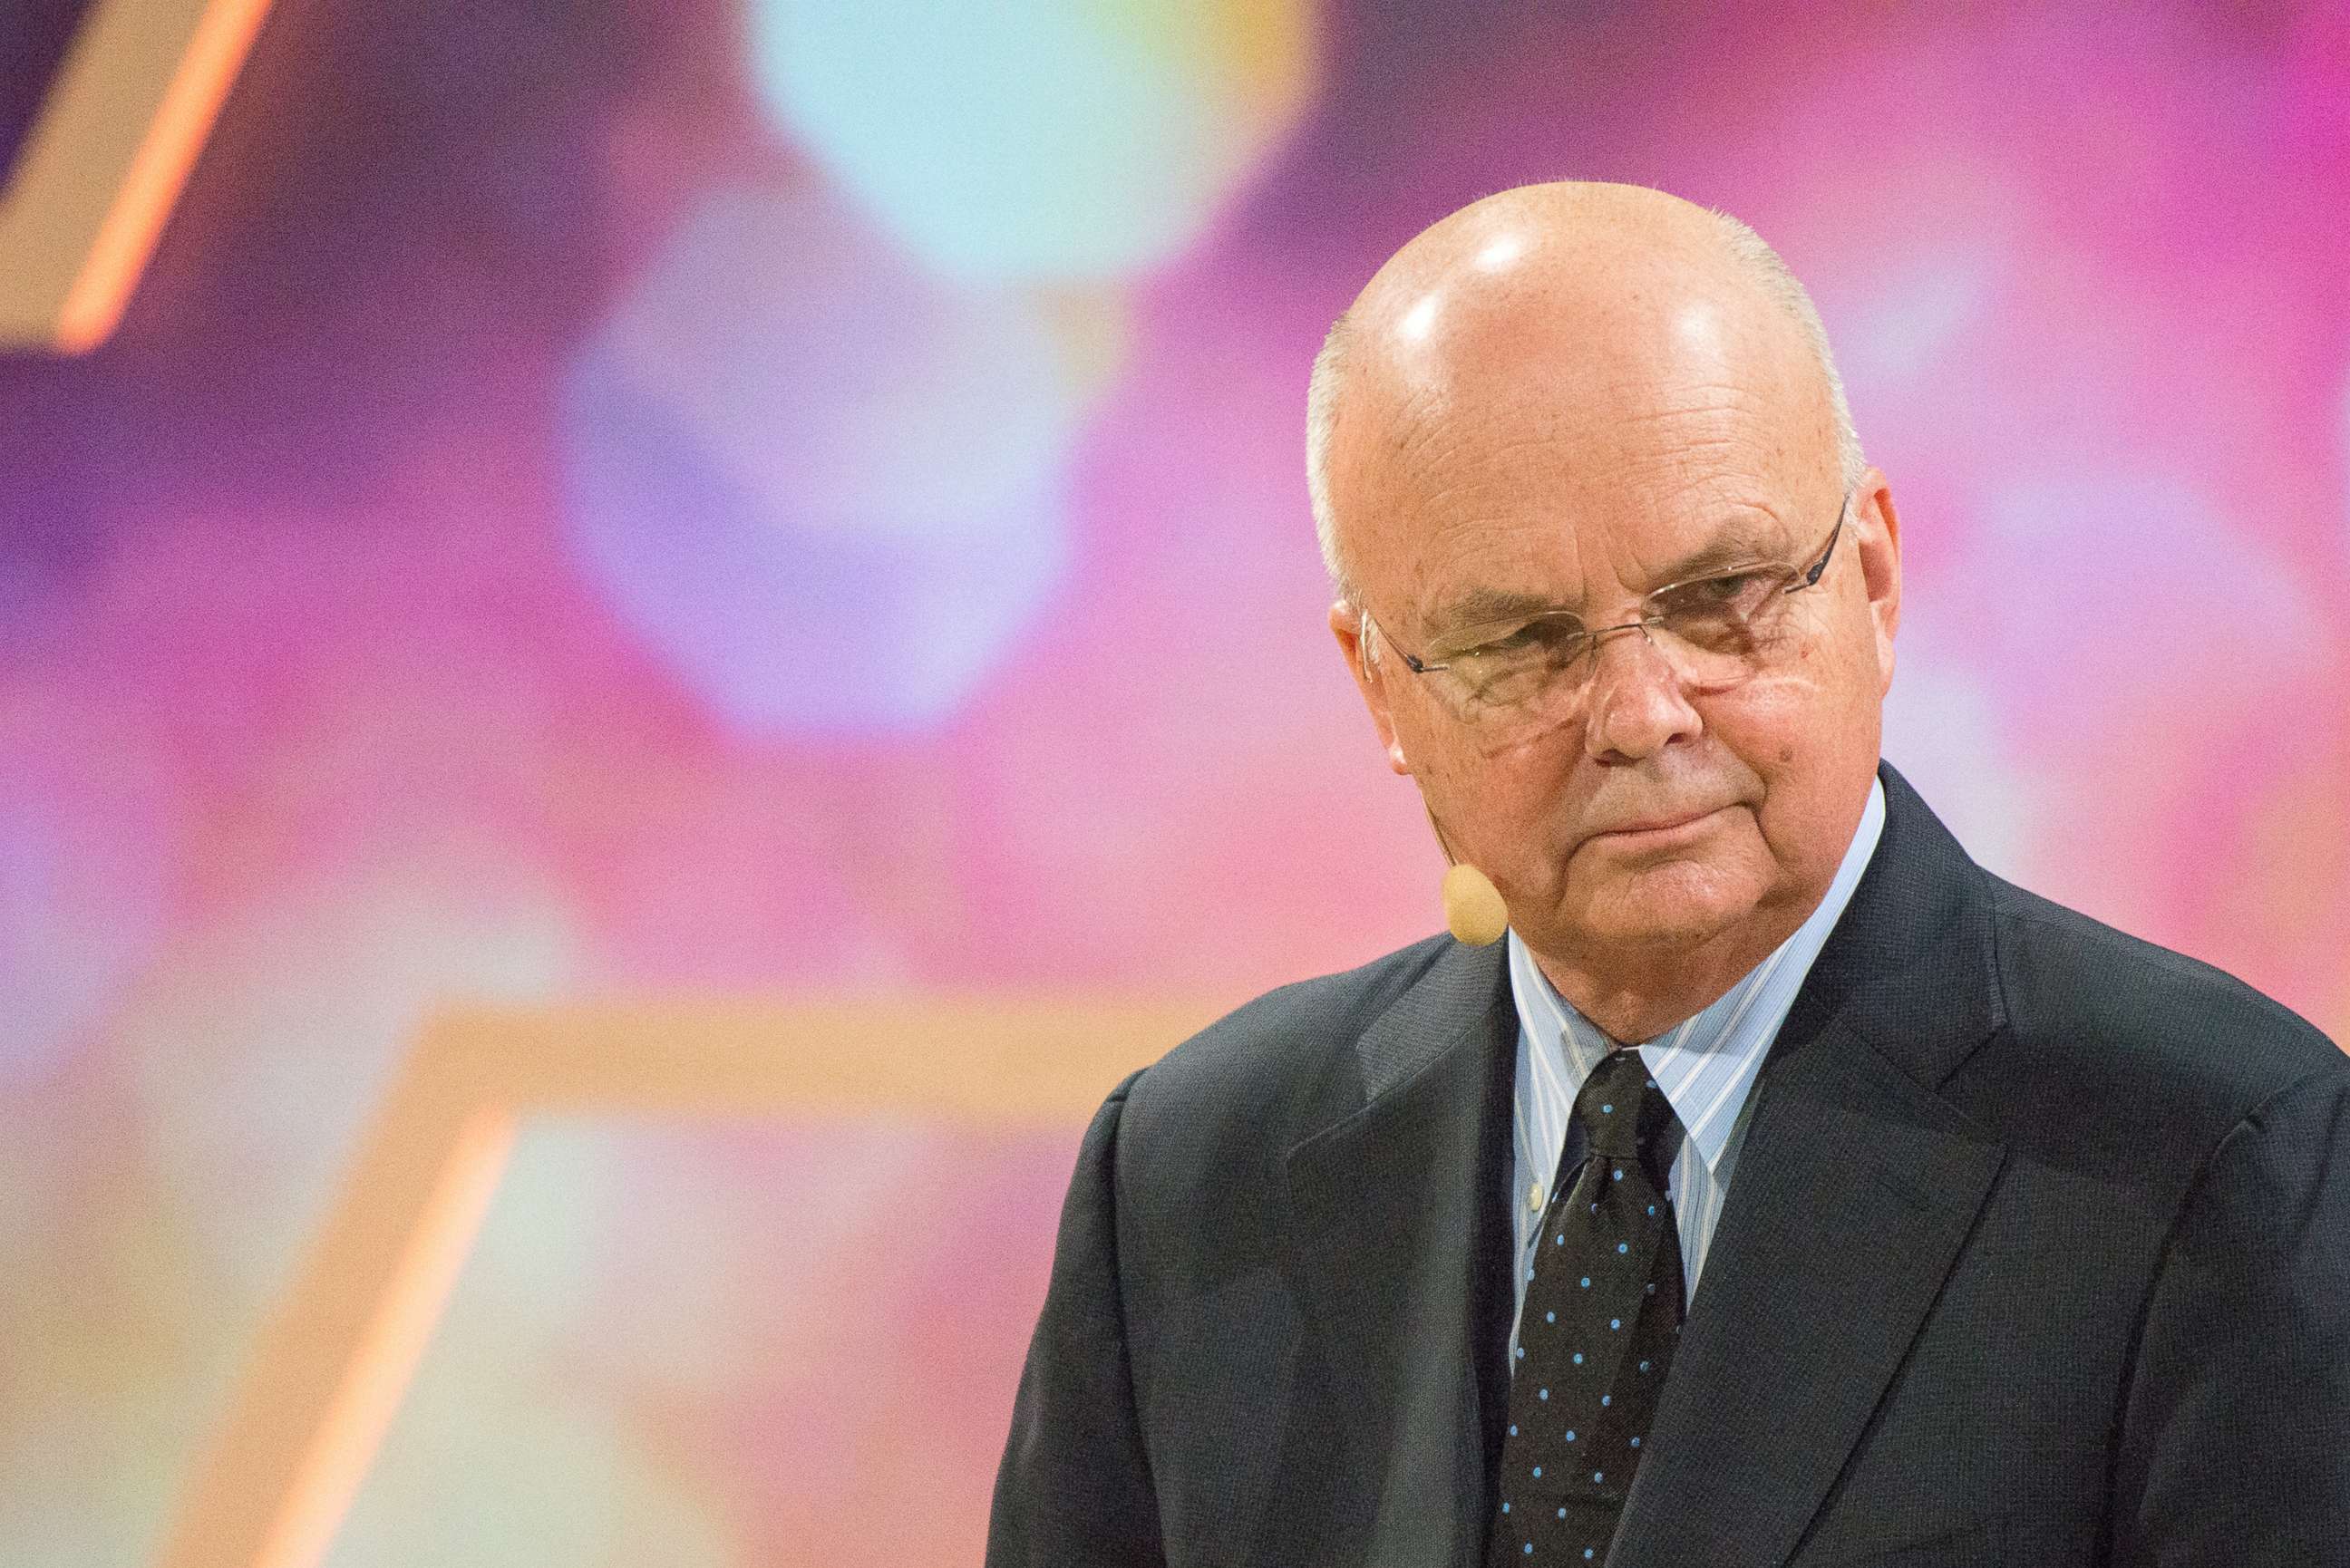 PHOTO: Michael Hayden, former Director of the CIA and NSA, speaks at a Nobel Week Dialogue: the Future of Truth conference at at Svenska Massan on Dec. 9, 2017, in Gothenburg, Sweden.